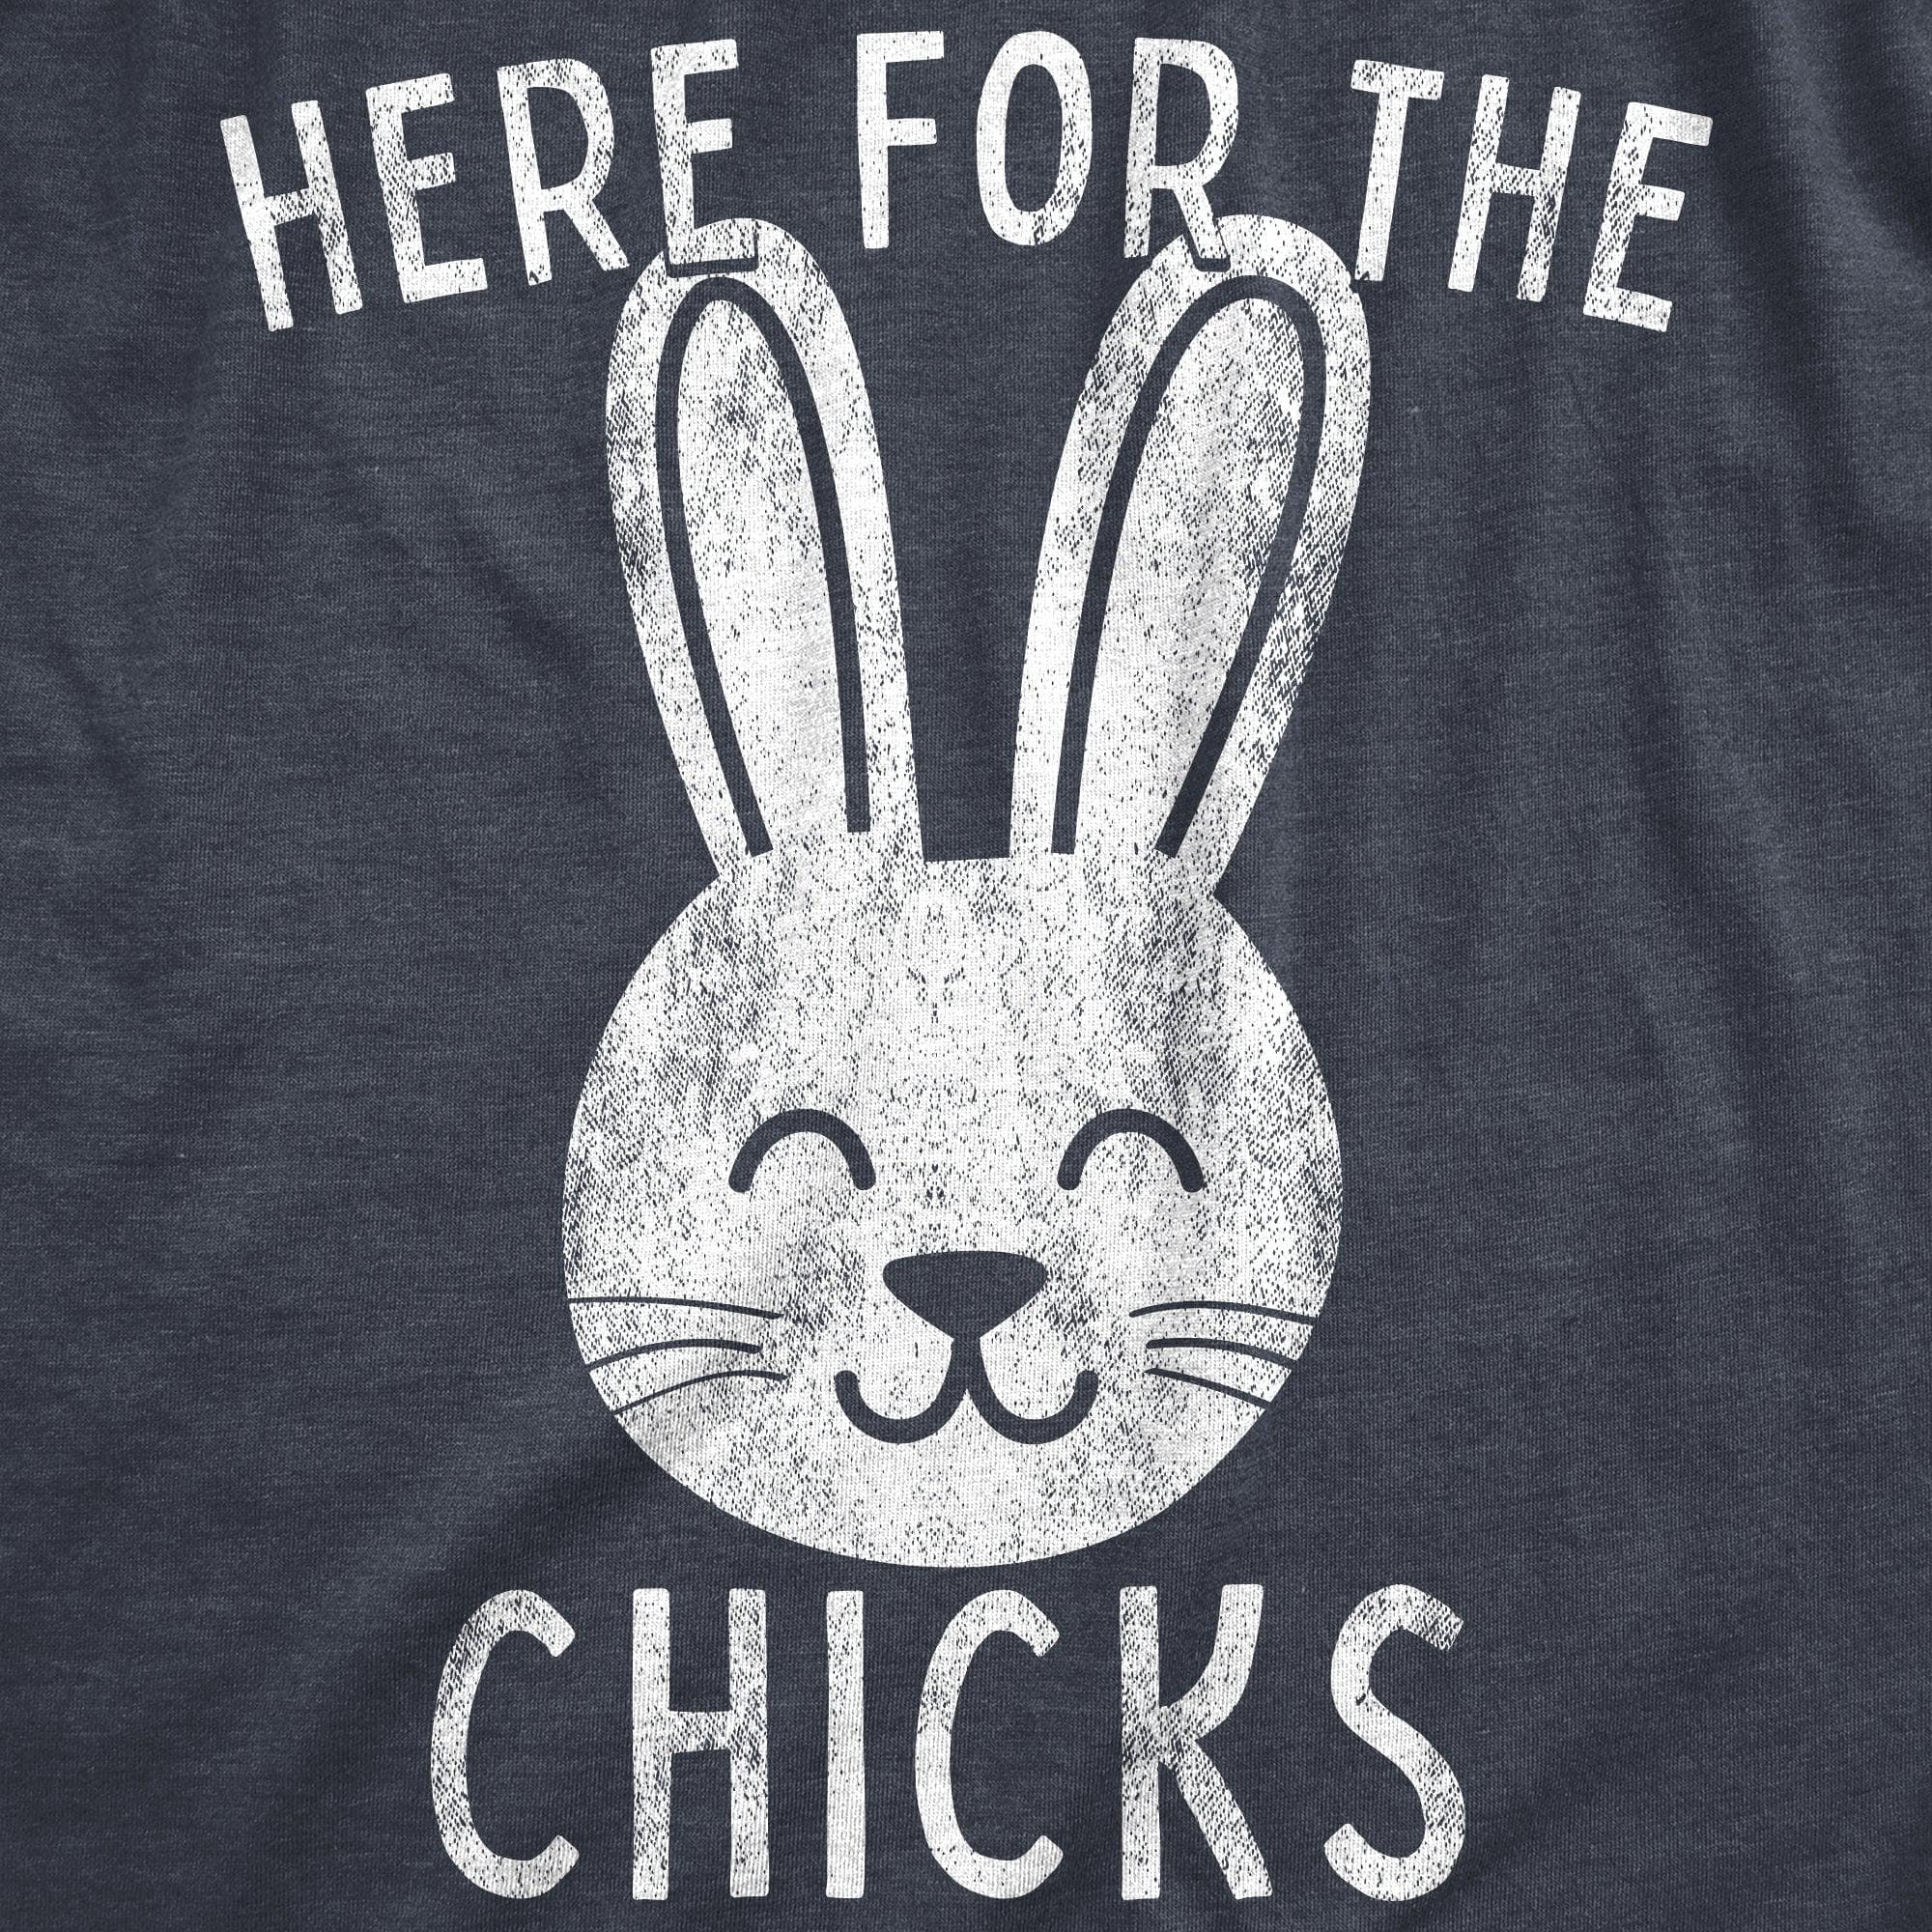 Here For The Chicks Men's Tshirt  -  Crazy Dog T-Shirts